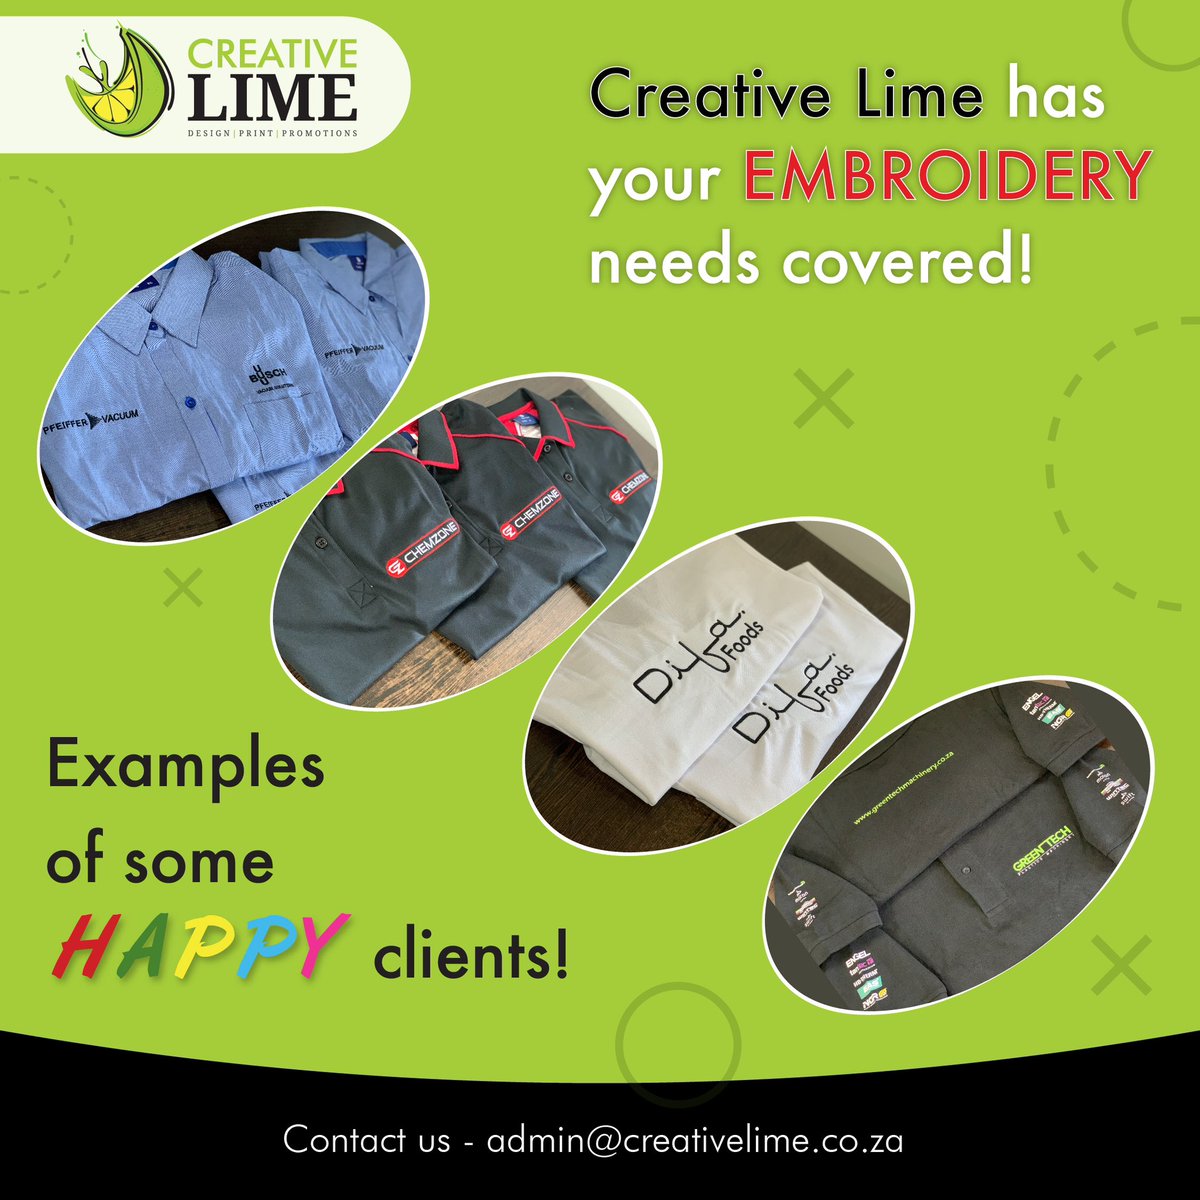 #logoembroidery #embroidery #customembroidery #branding #creativelime #Happyclients 
#design #print #promotions